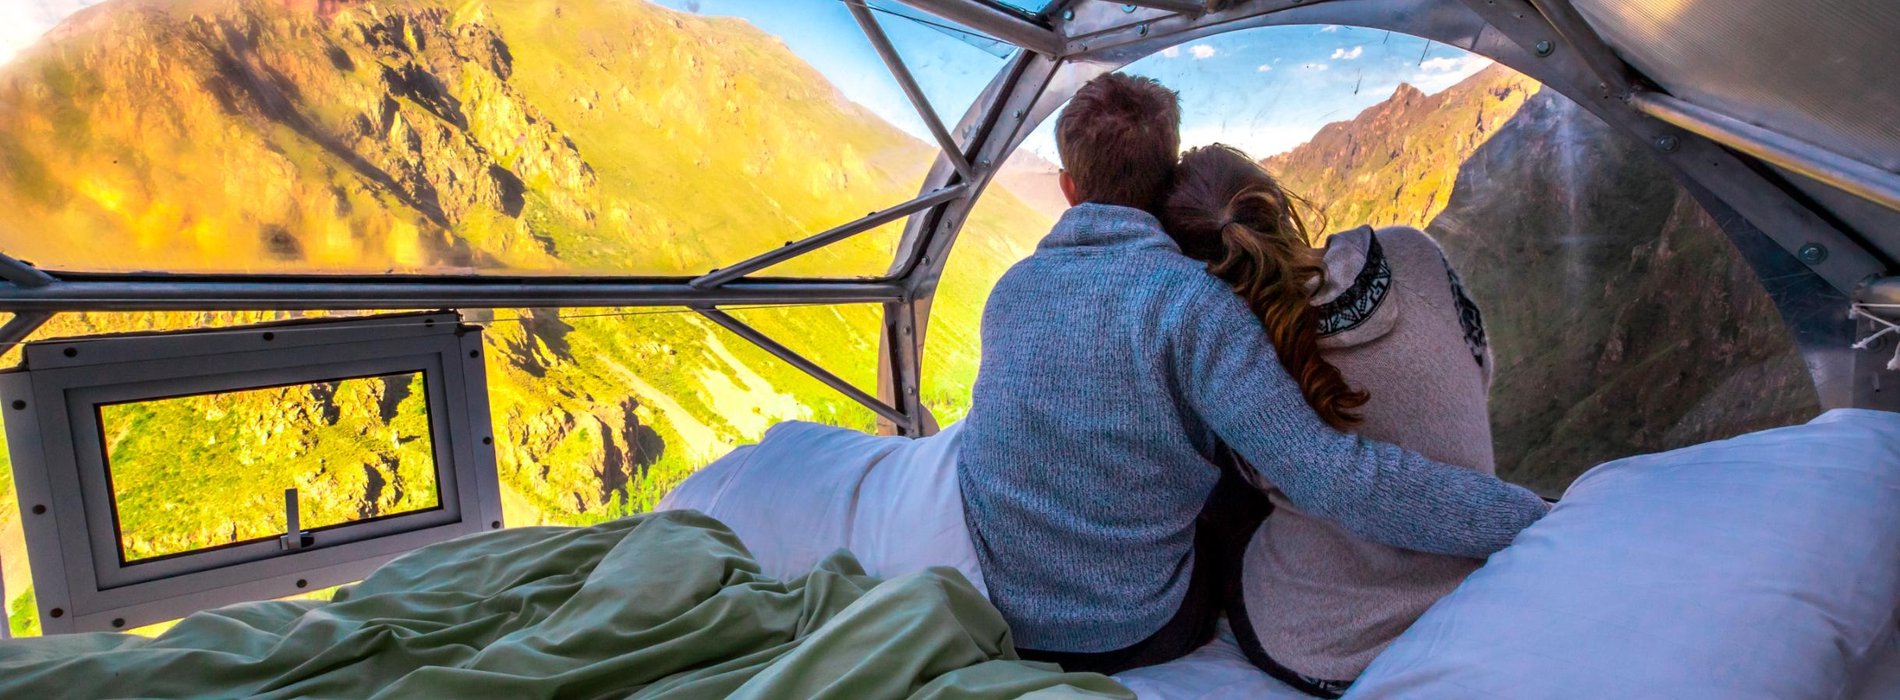 Sleep on the Side of a Mountain at Sky lodge Adventure Suites